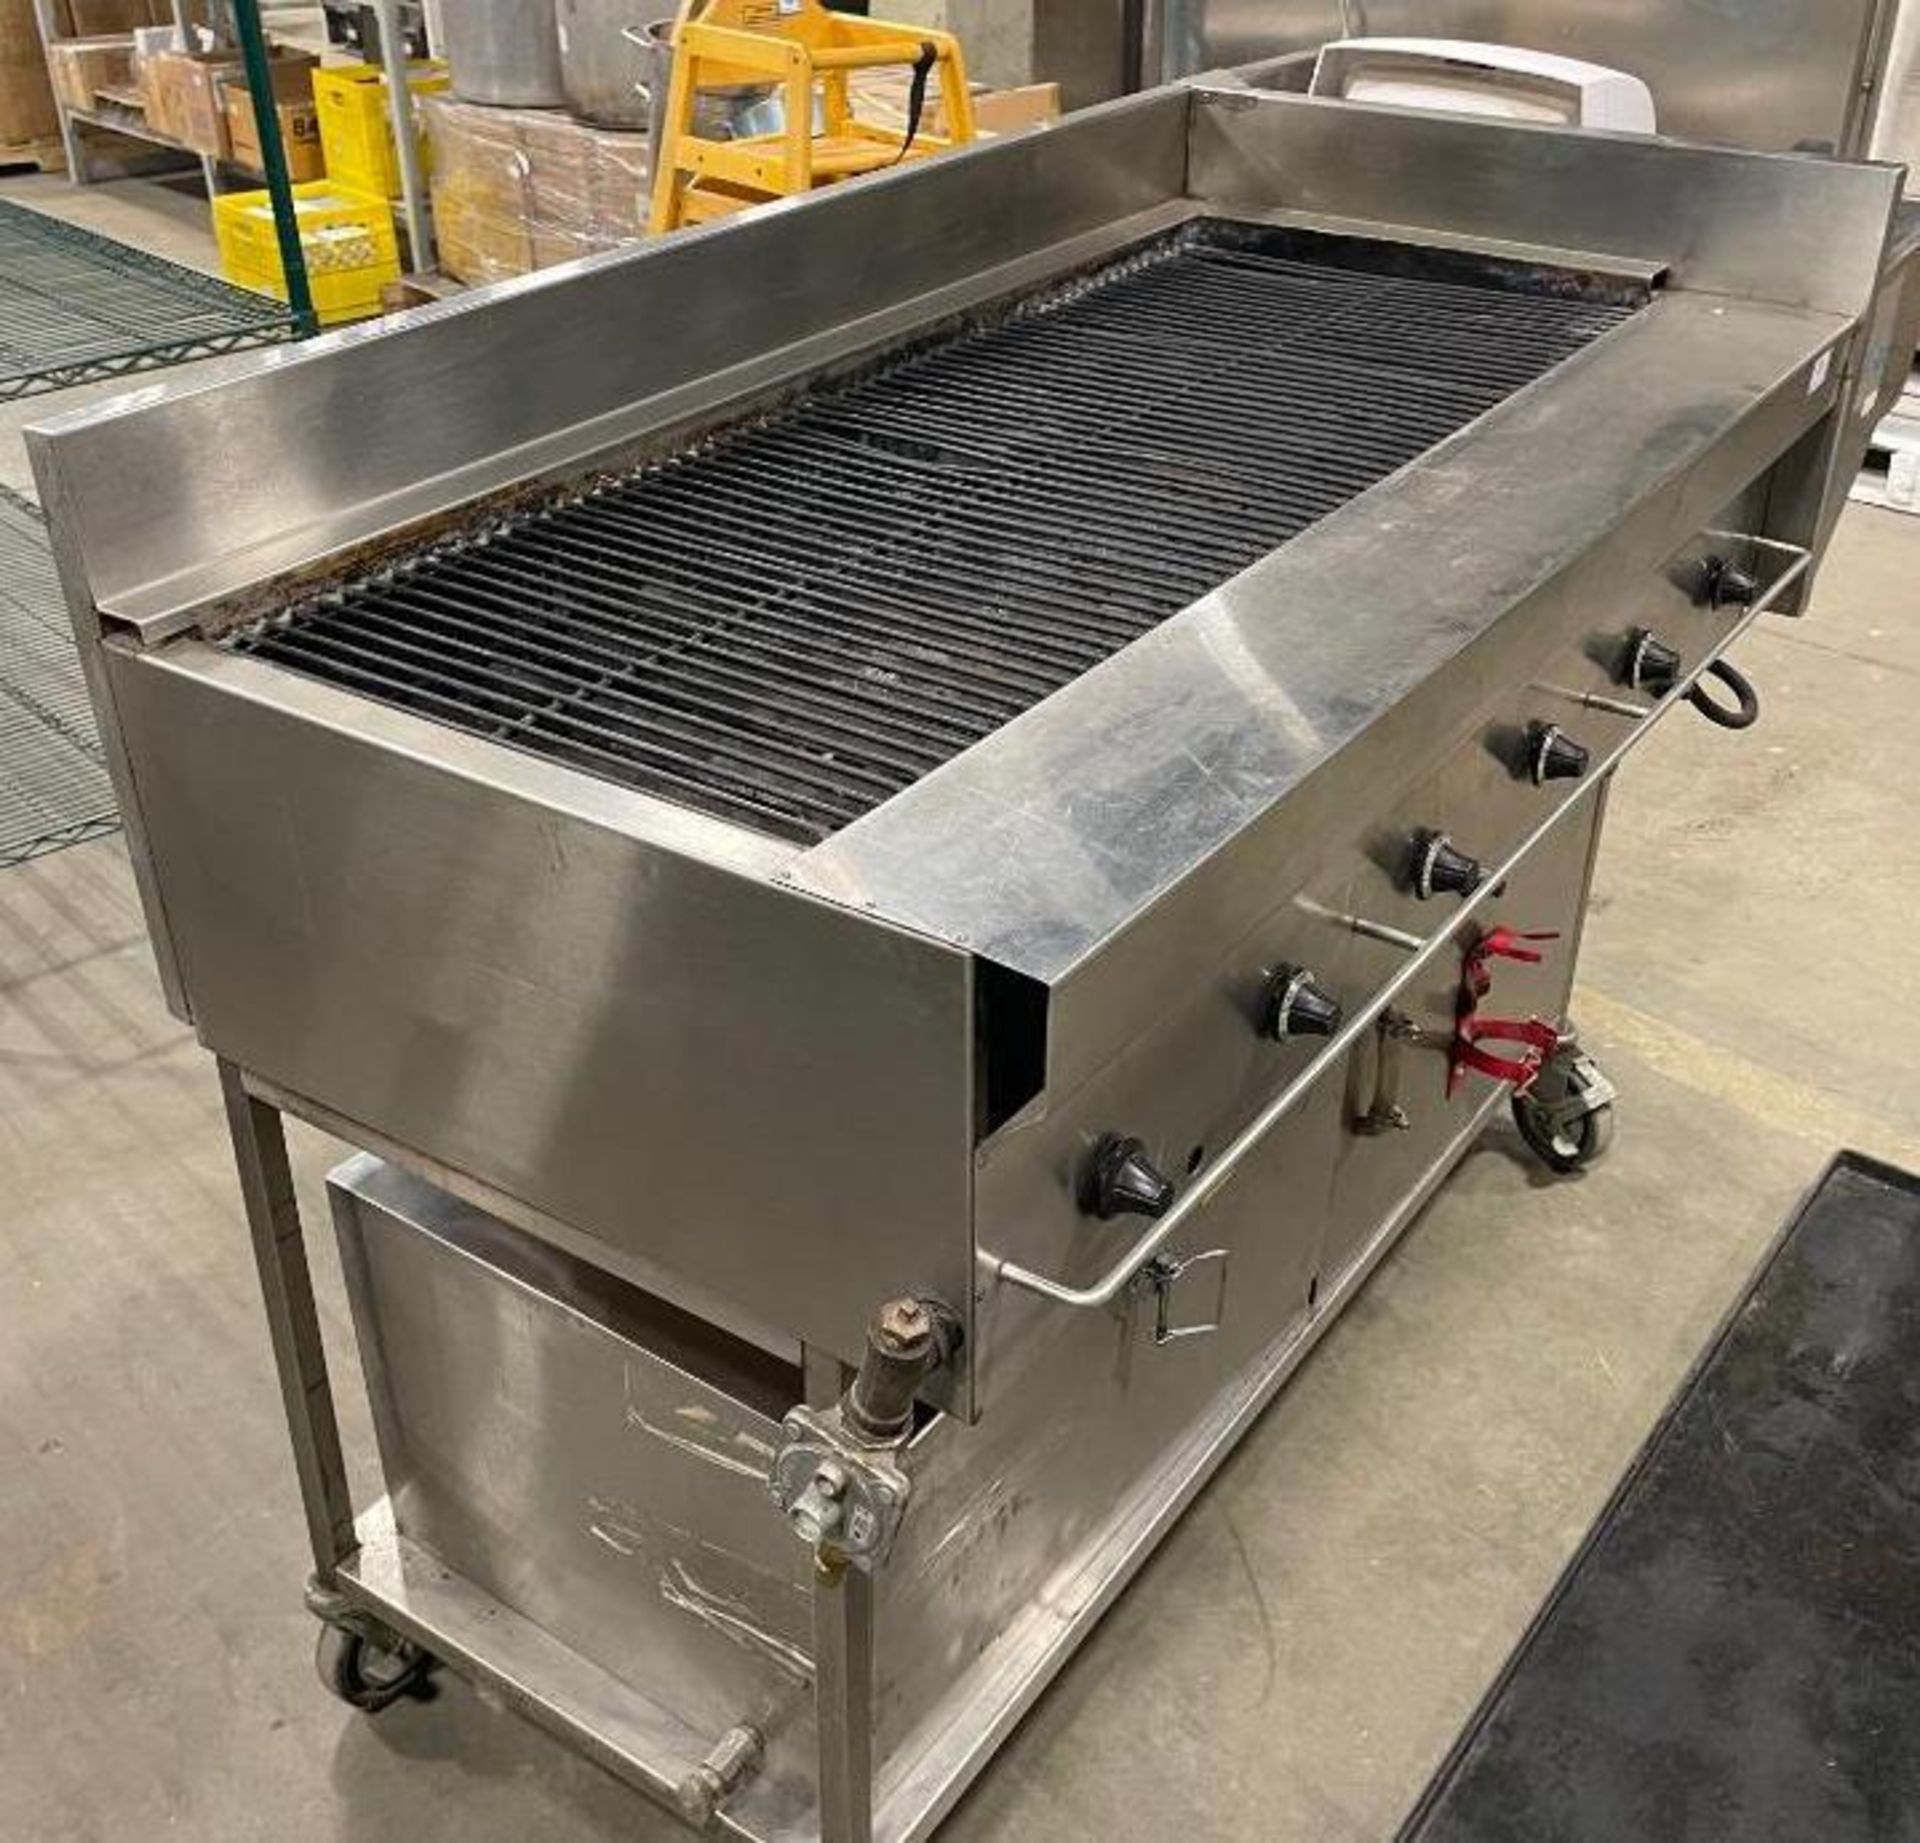 MCKINLEY & TAYLOR CUSTOM 6 BURNER CHARBROILER WITH SINK & CAST IRON FLAT TOP - Image 5 of 9